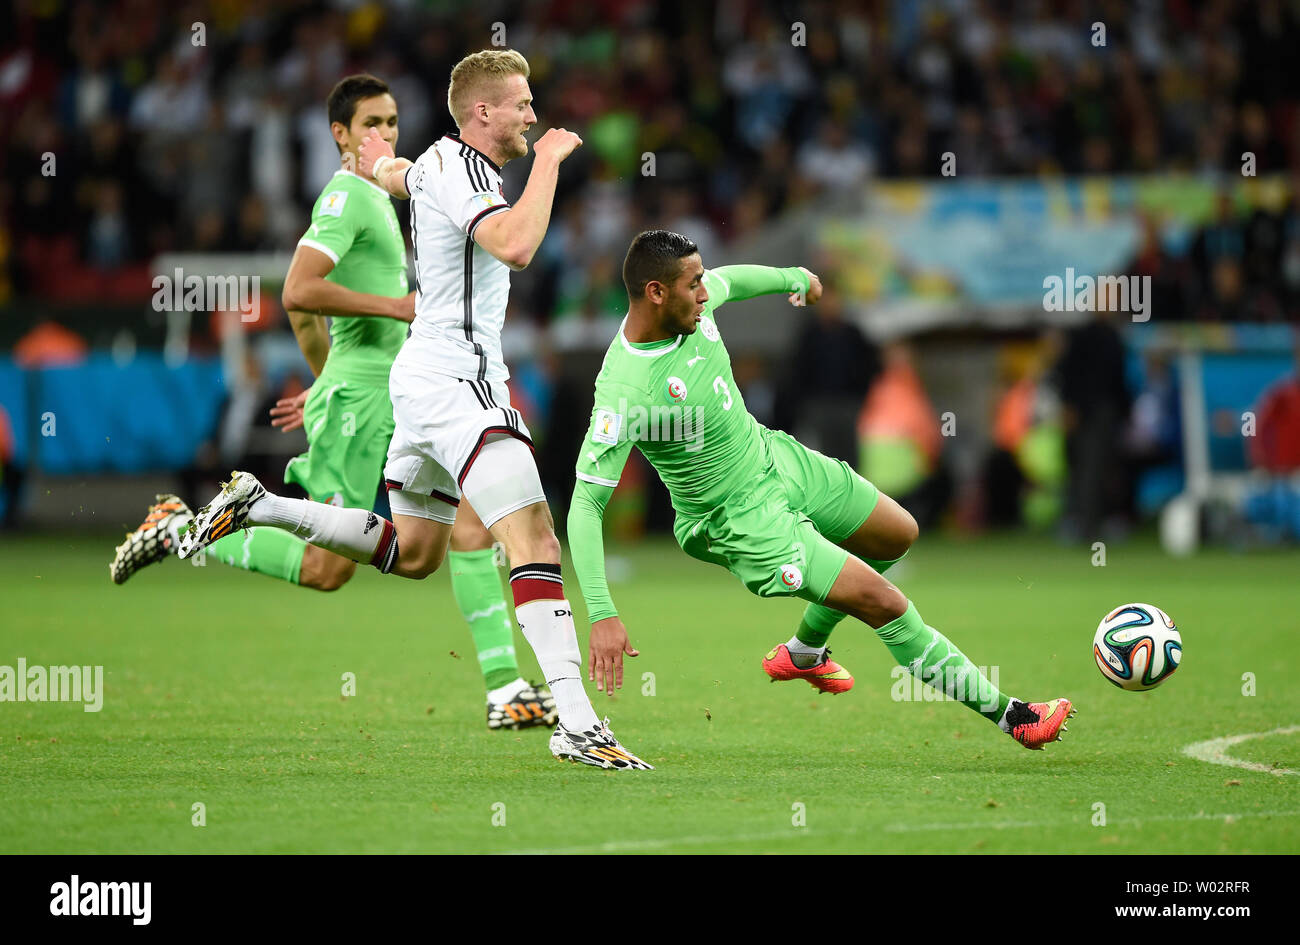 Andre Schurrle (L) of Germany competes with Faouzi Ghoulam of Algeria during the 2014 FIFA World Cup Round of 16 match at the Estadio Beira-Rio in Porto Alegre, Brazil on June 30, 2014. UPI/Chris Brunskill Stock Photo